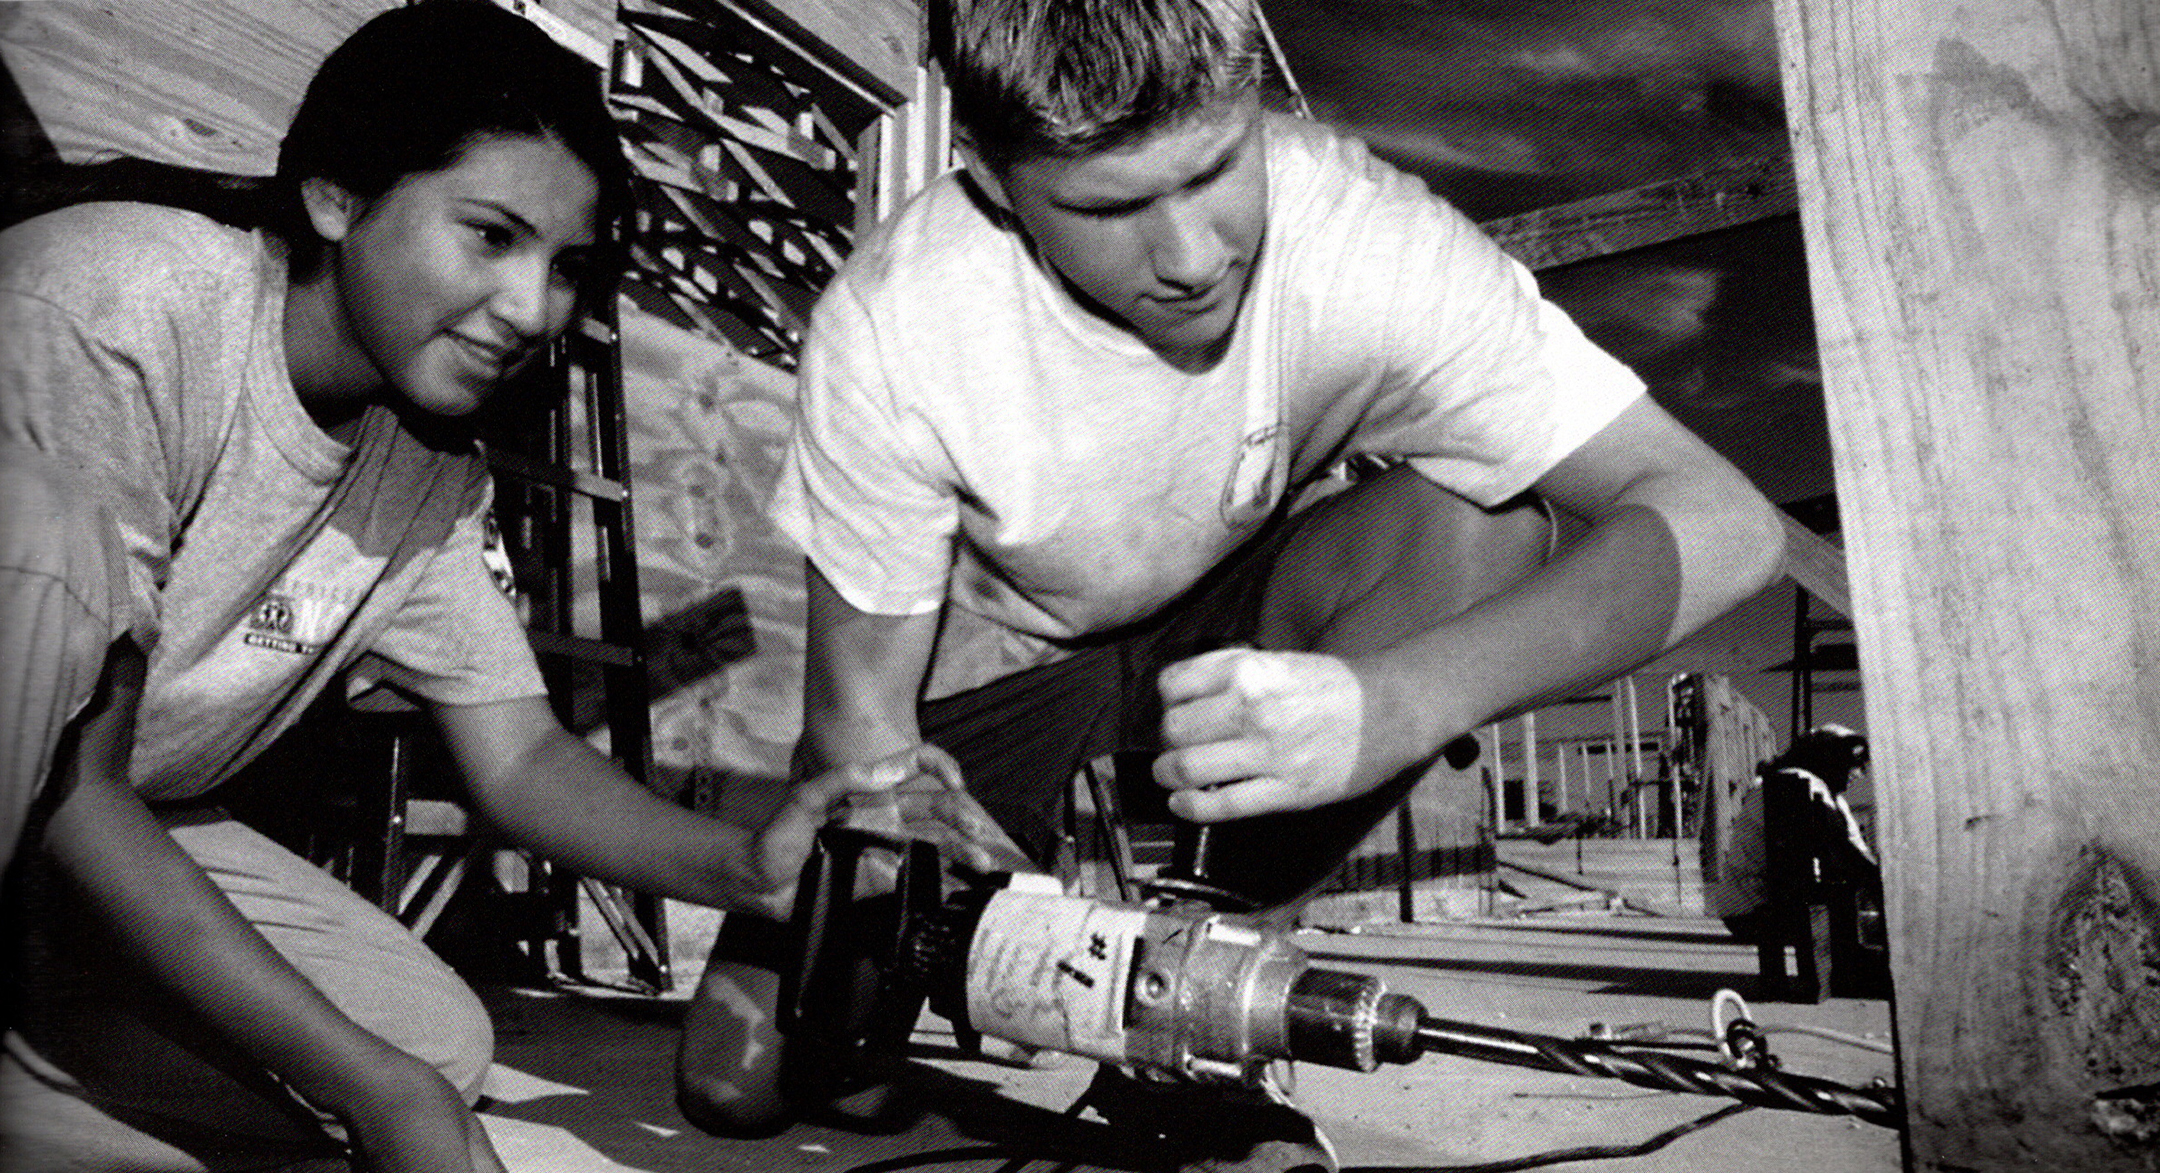 black and white photo of two students, one male and one female, drilling a hole into a beam of wood at a worksite